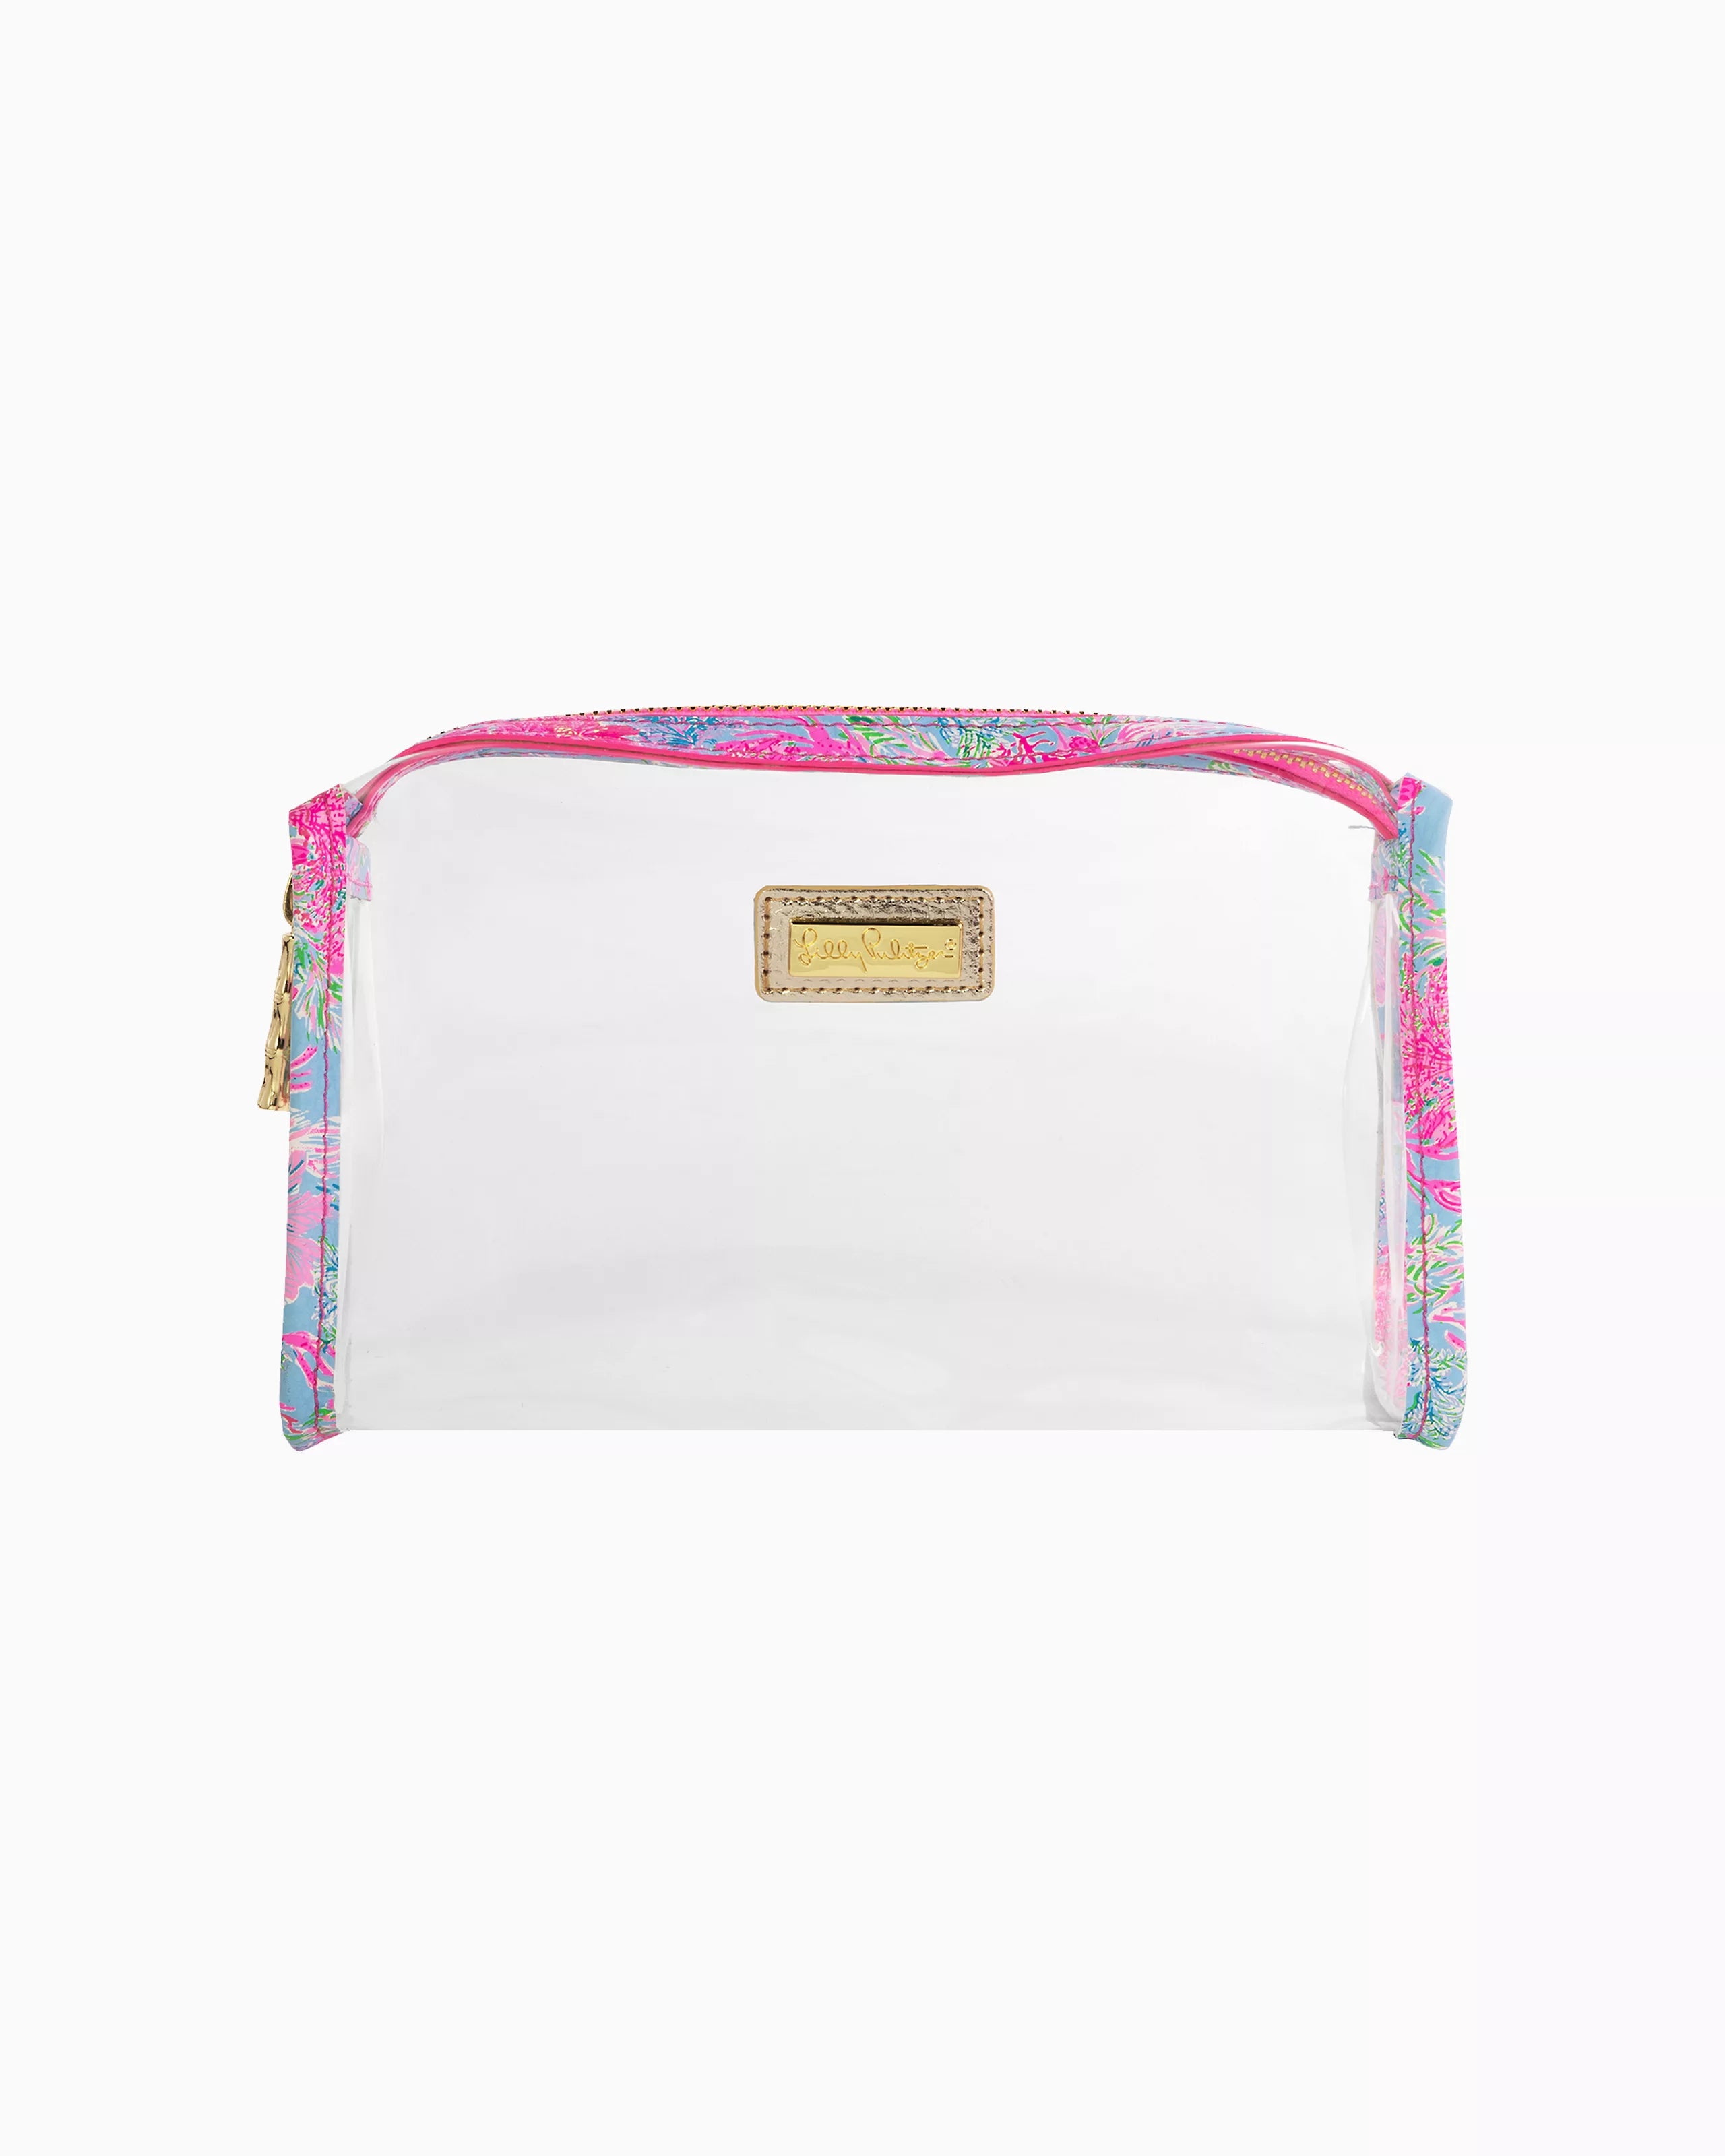 Pencil Case by Lilly Pulitzer - Cay To My Heart